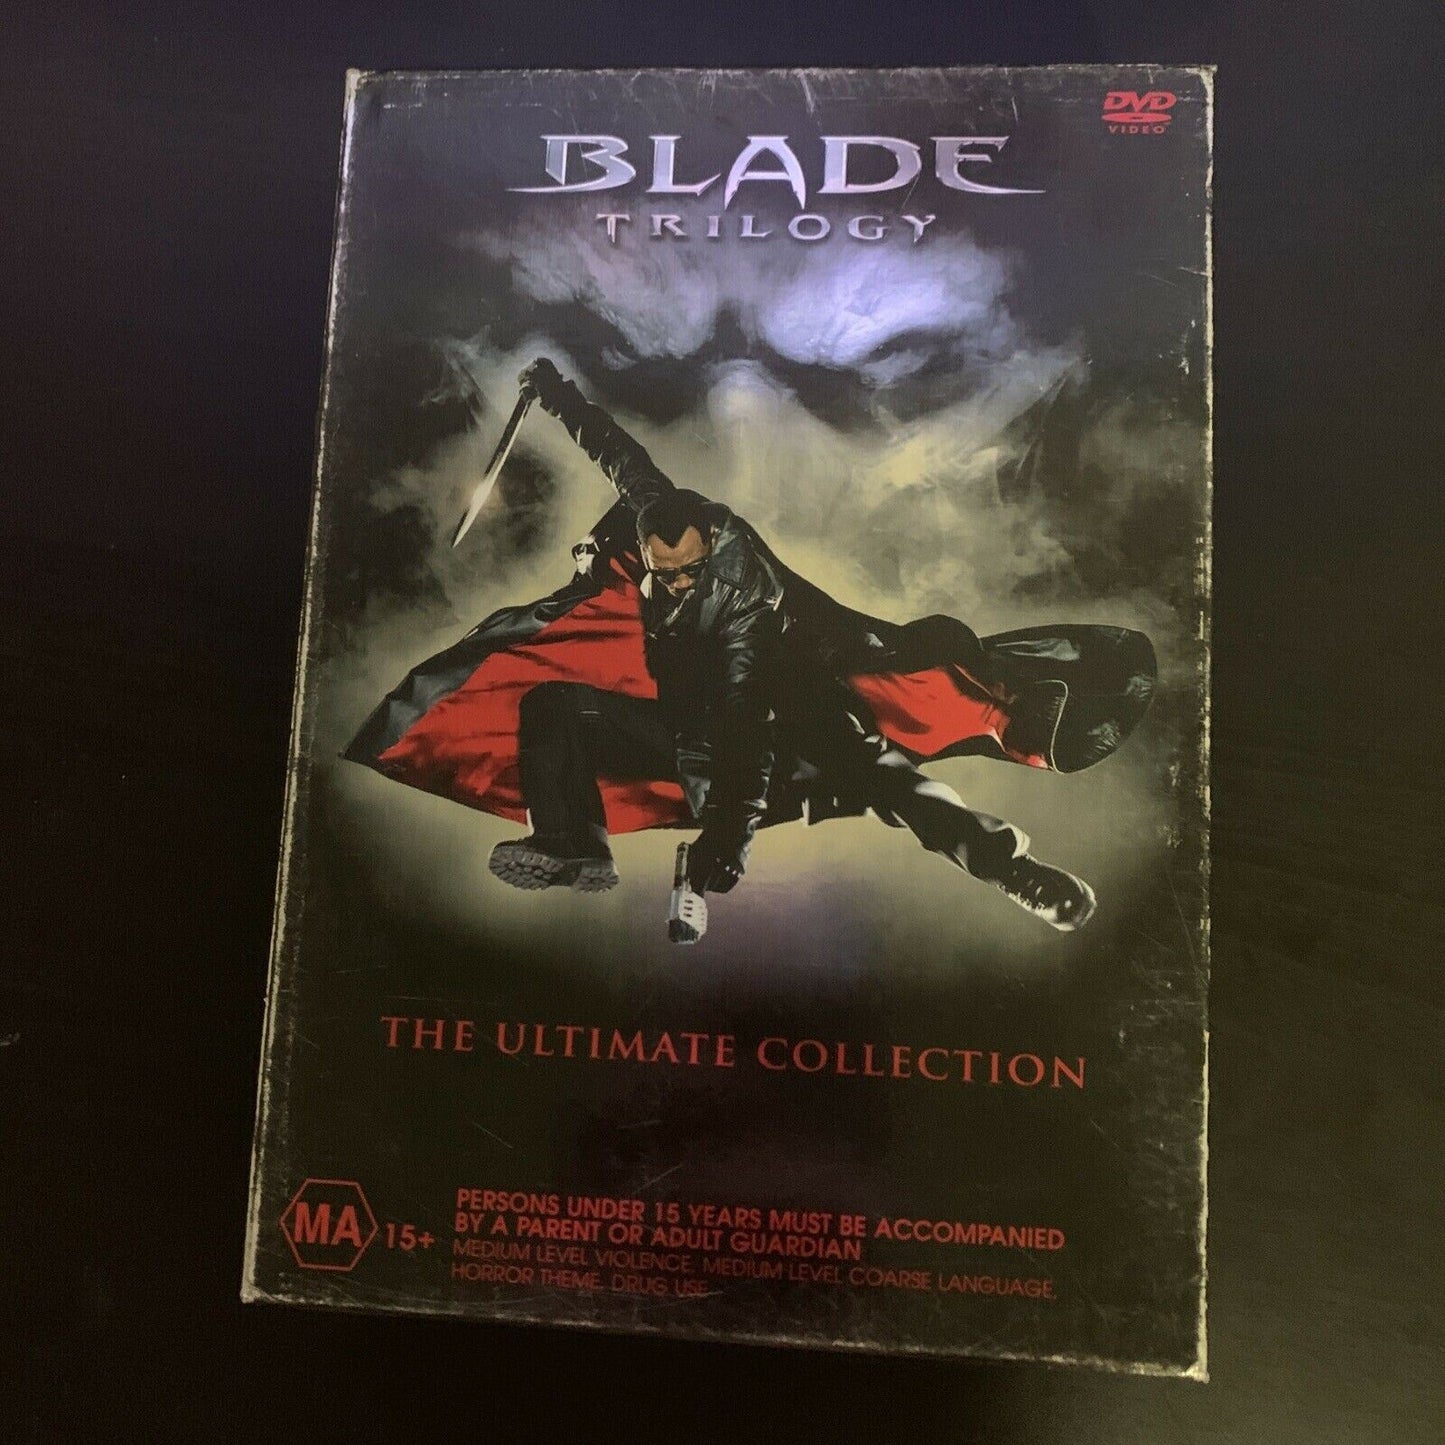 Blade Trilogy - The Ultimate Collection (DVD, 2005, 5-Disc Set) Region 4